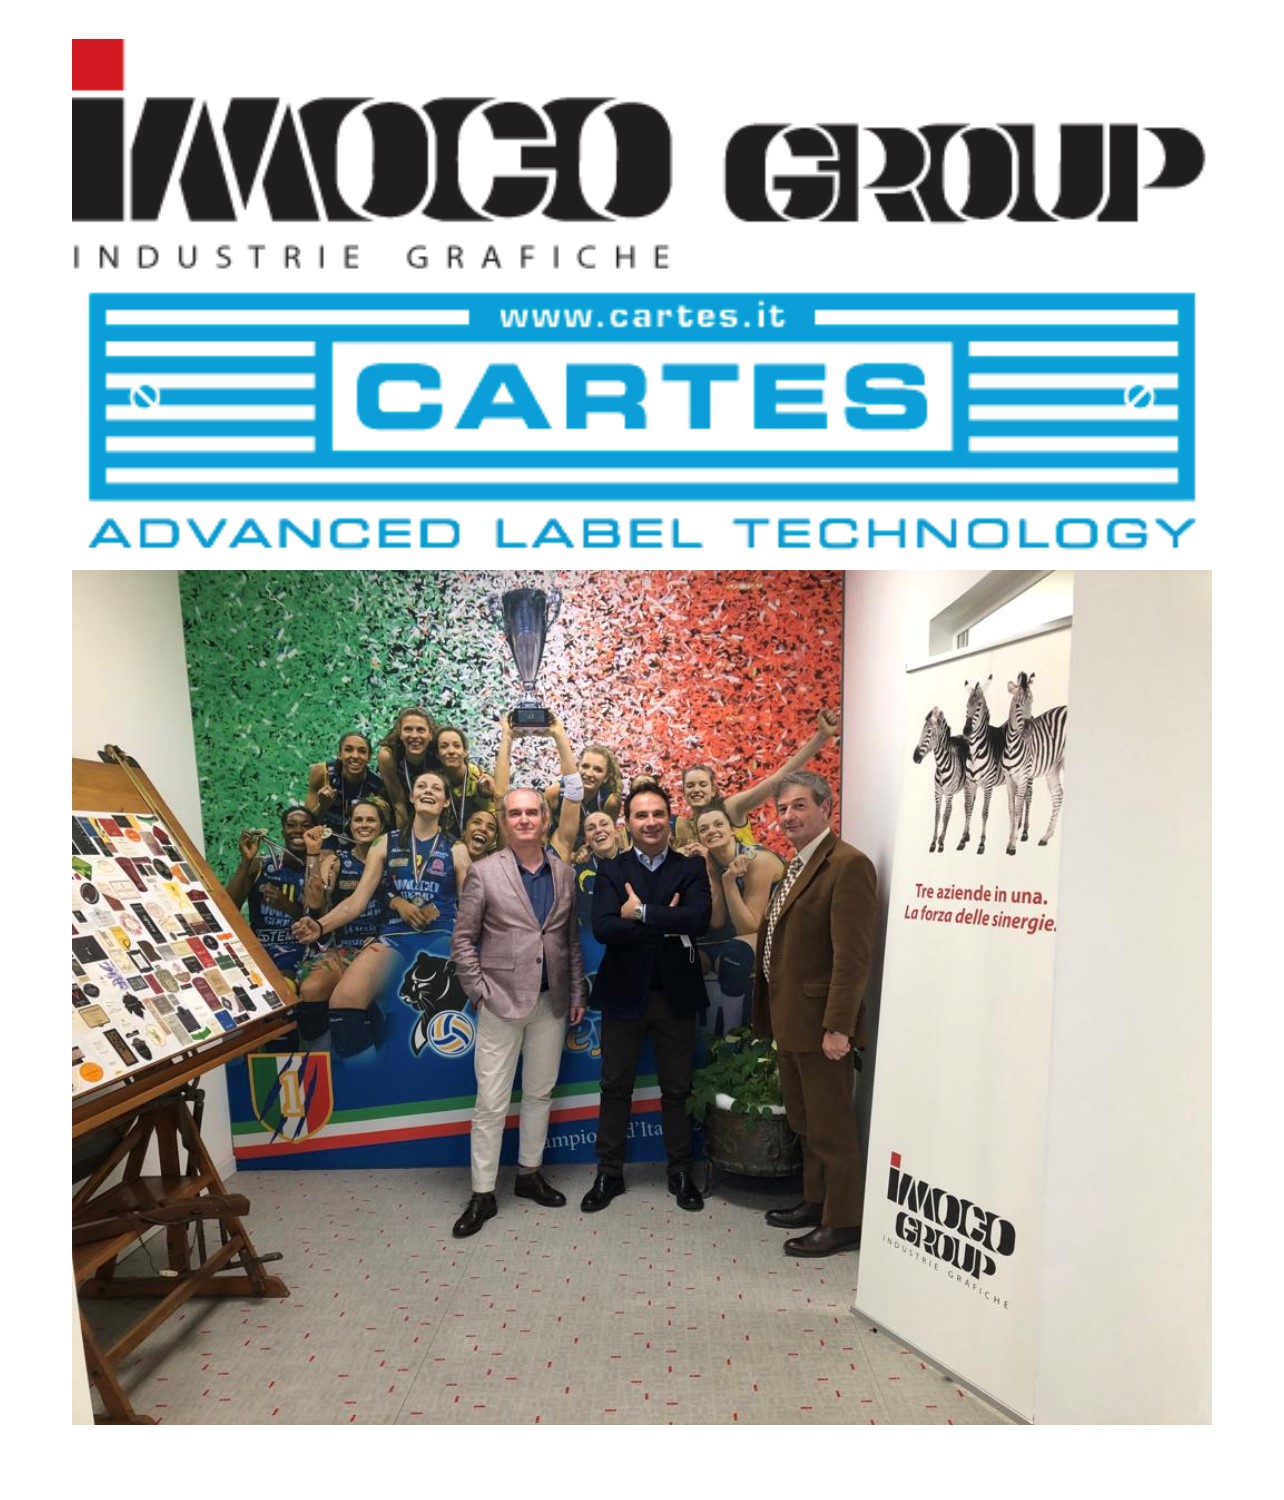 From left to right: Mr. Luca Moretto di IMOCO, Mr. Ivan Spina from CARTES and Giovanni Bertuzzo from CARTES.